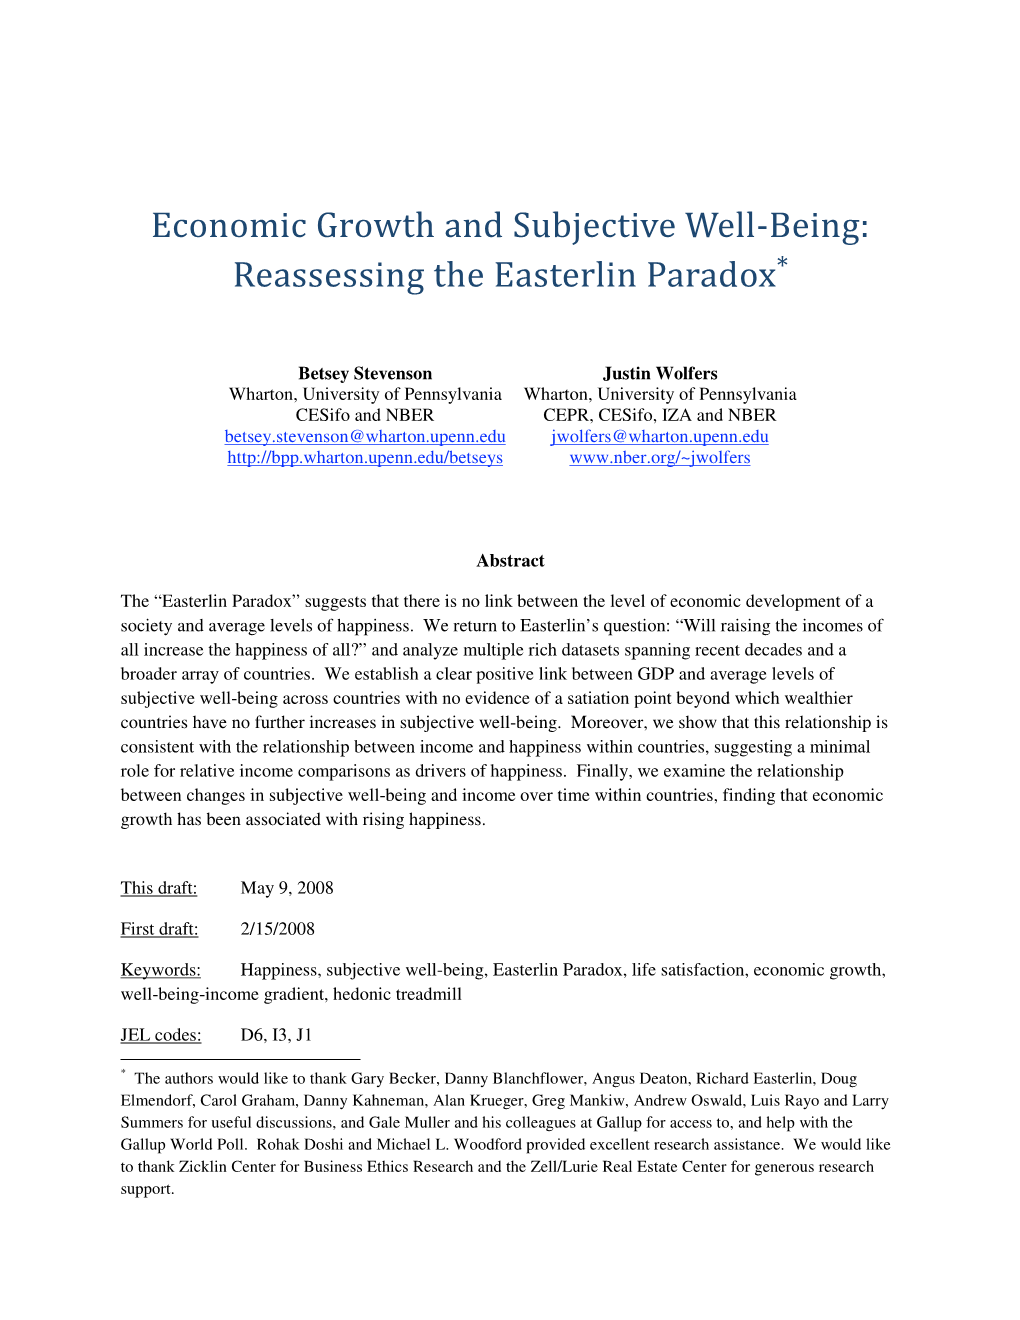 Economic Growth and Subjective Well Being: Reassessing the Easterlin